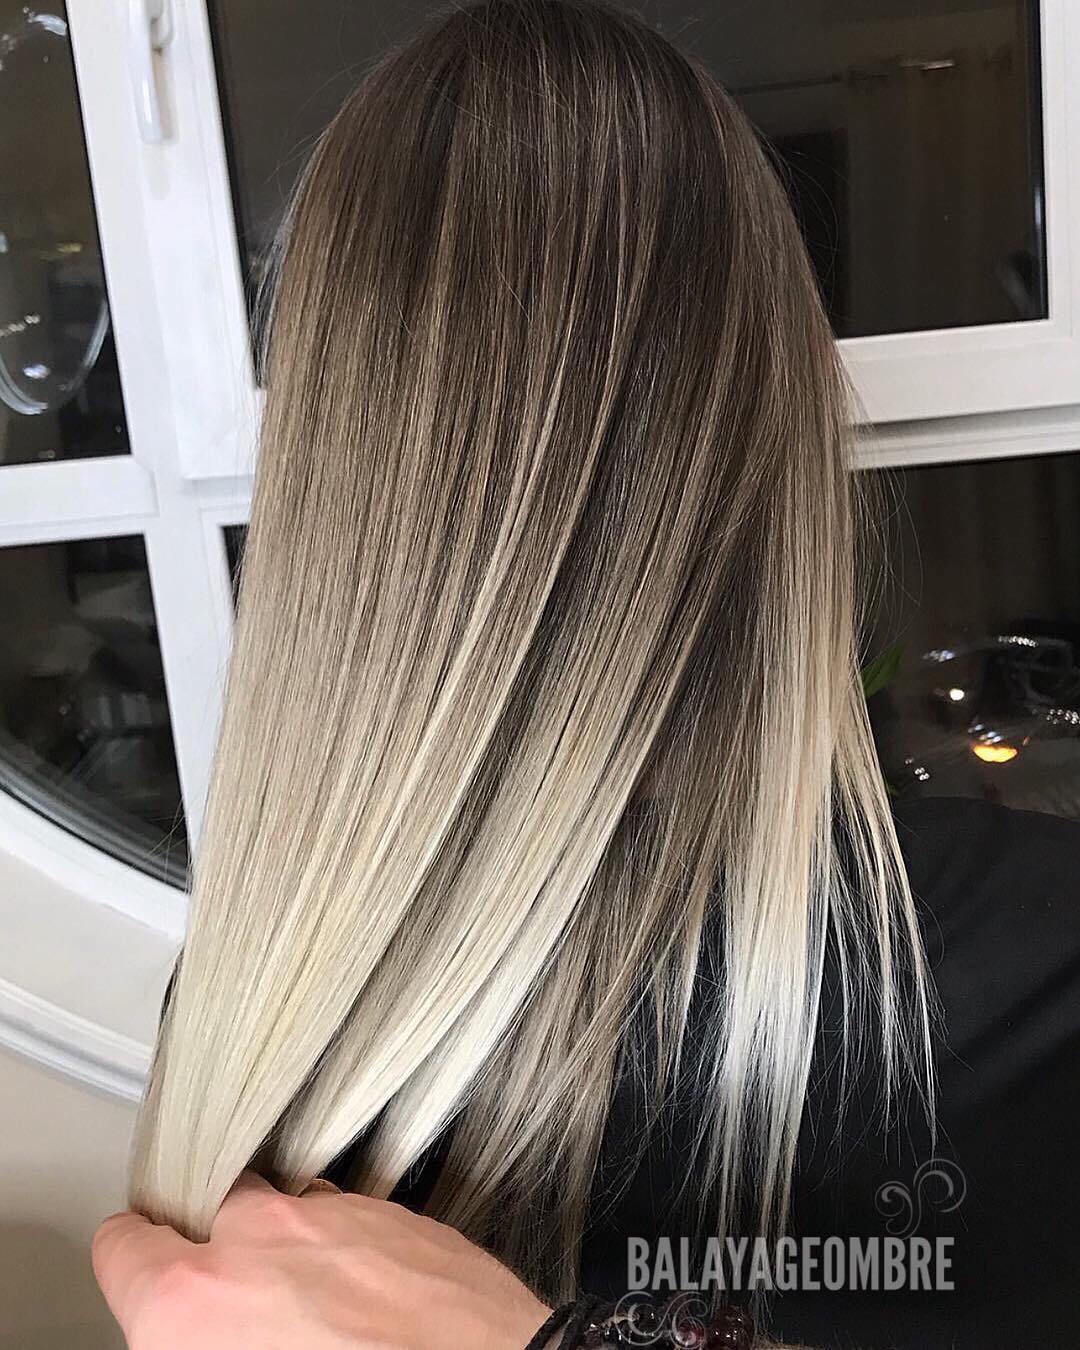 2018 Ombre Balayage Hairstyles For Chic Mid Length Hair ! 7